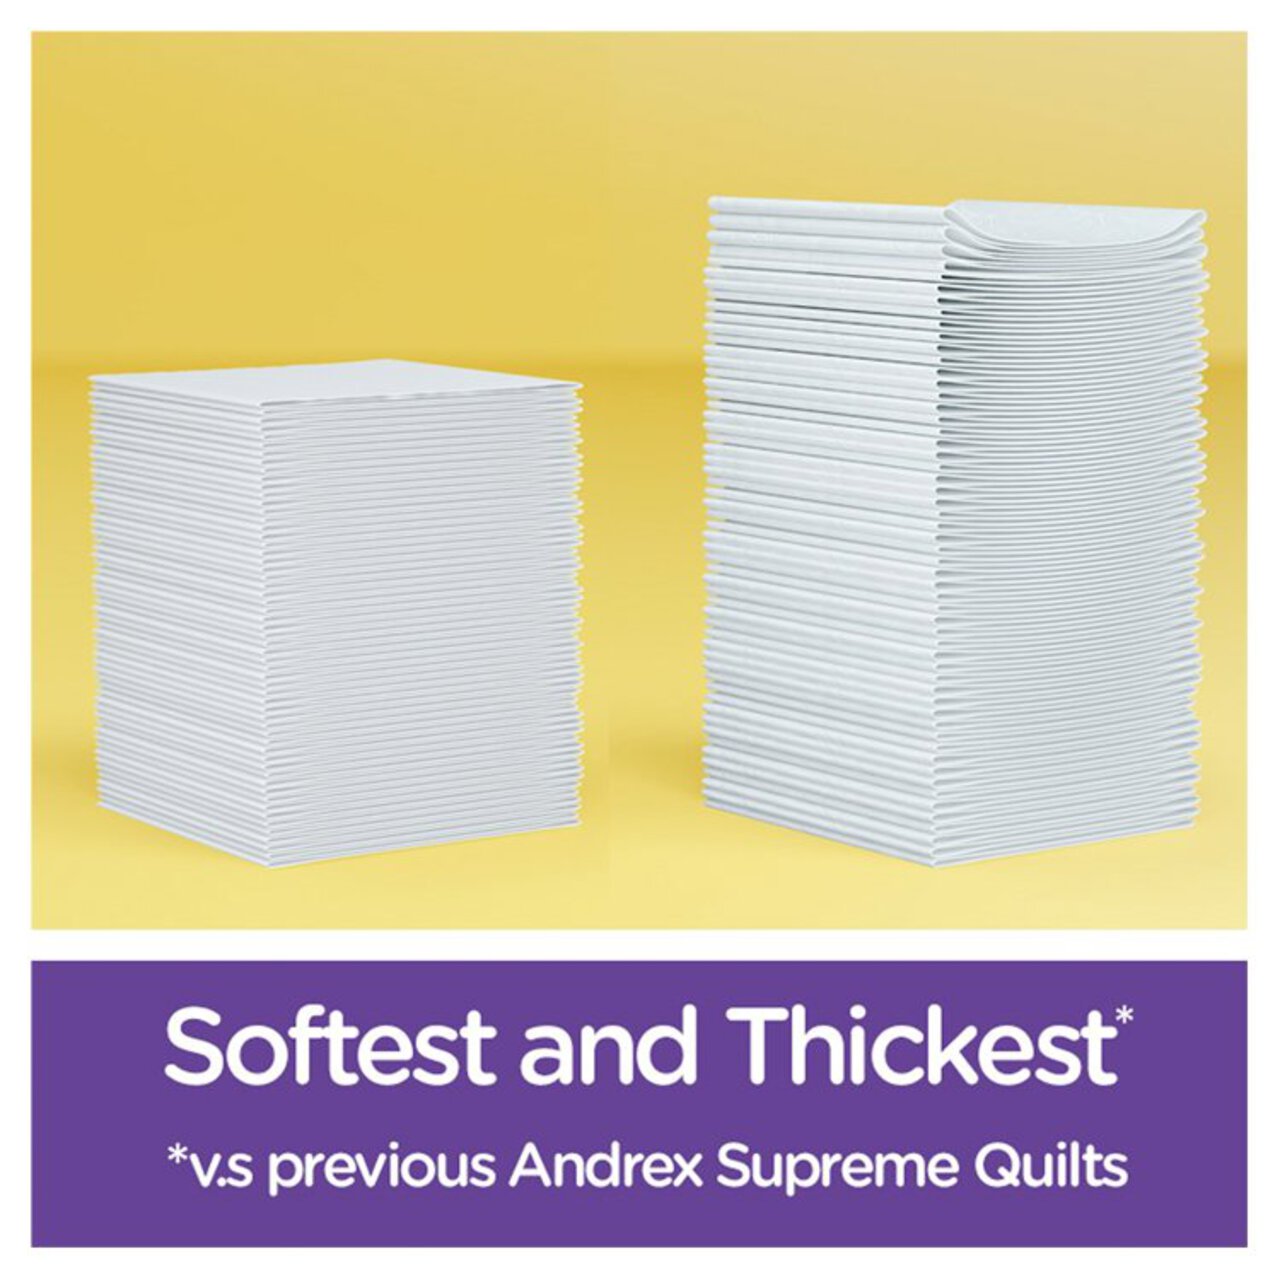 Andrex Supreme Quilts Toilet Roll 9 per pack